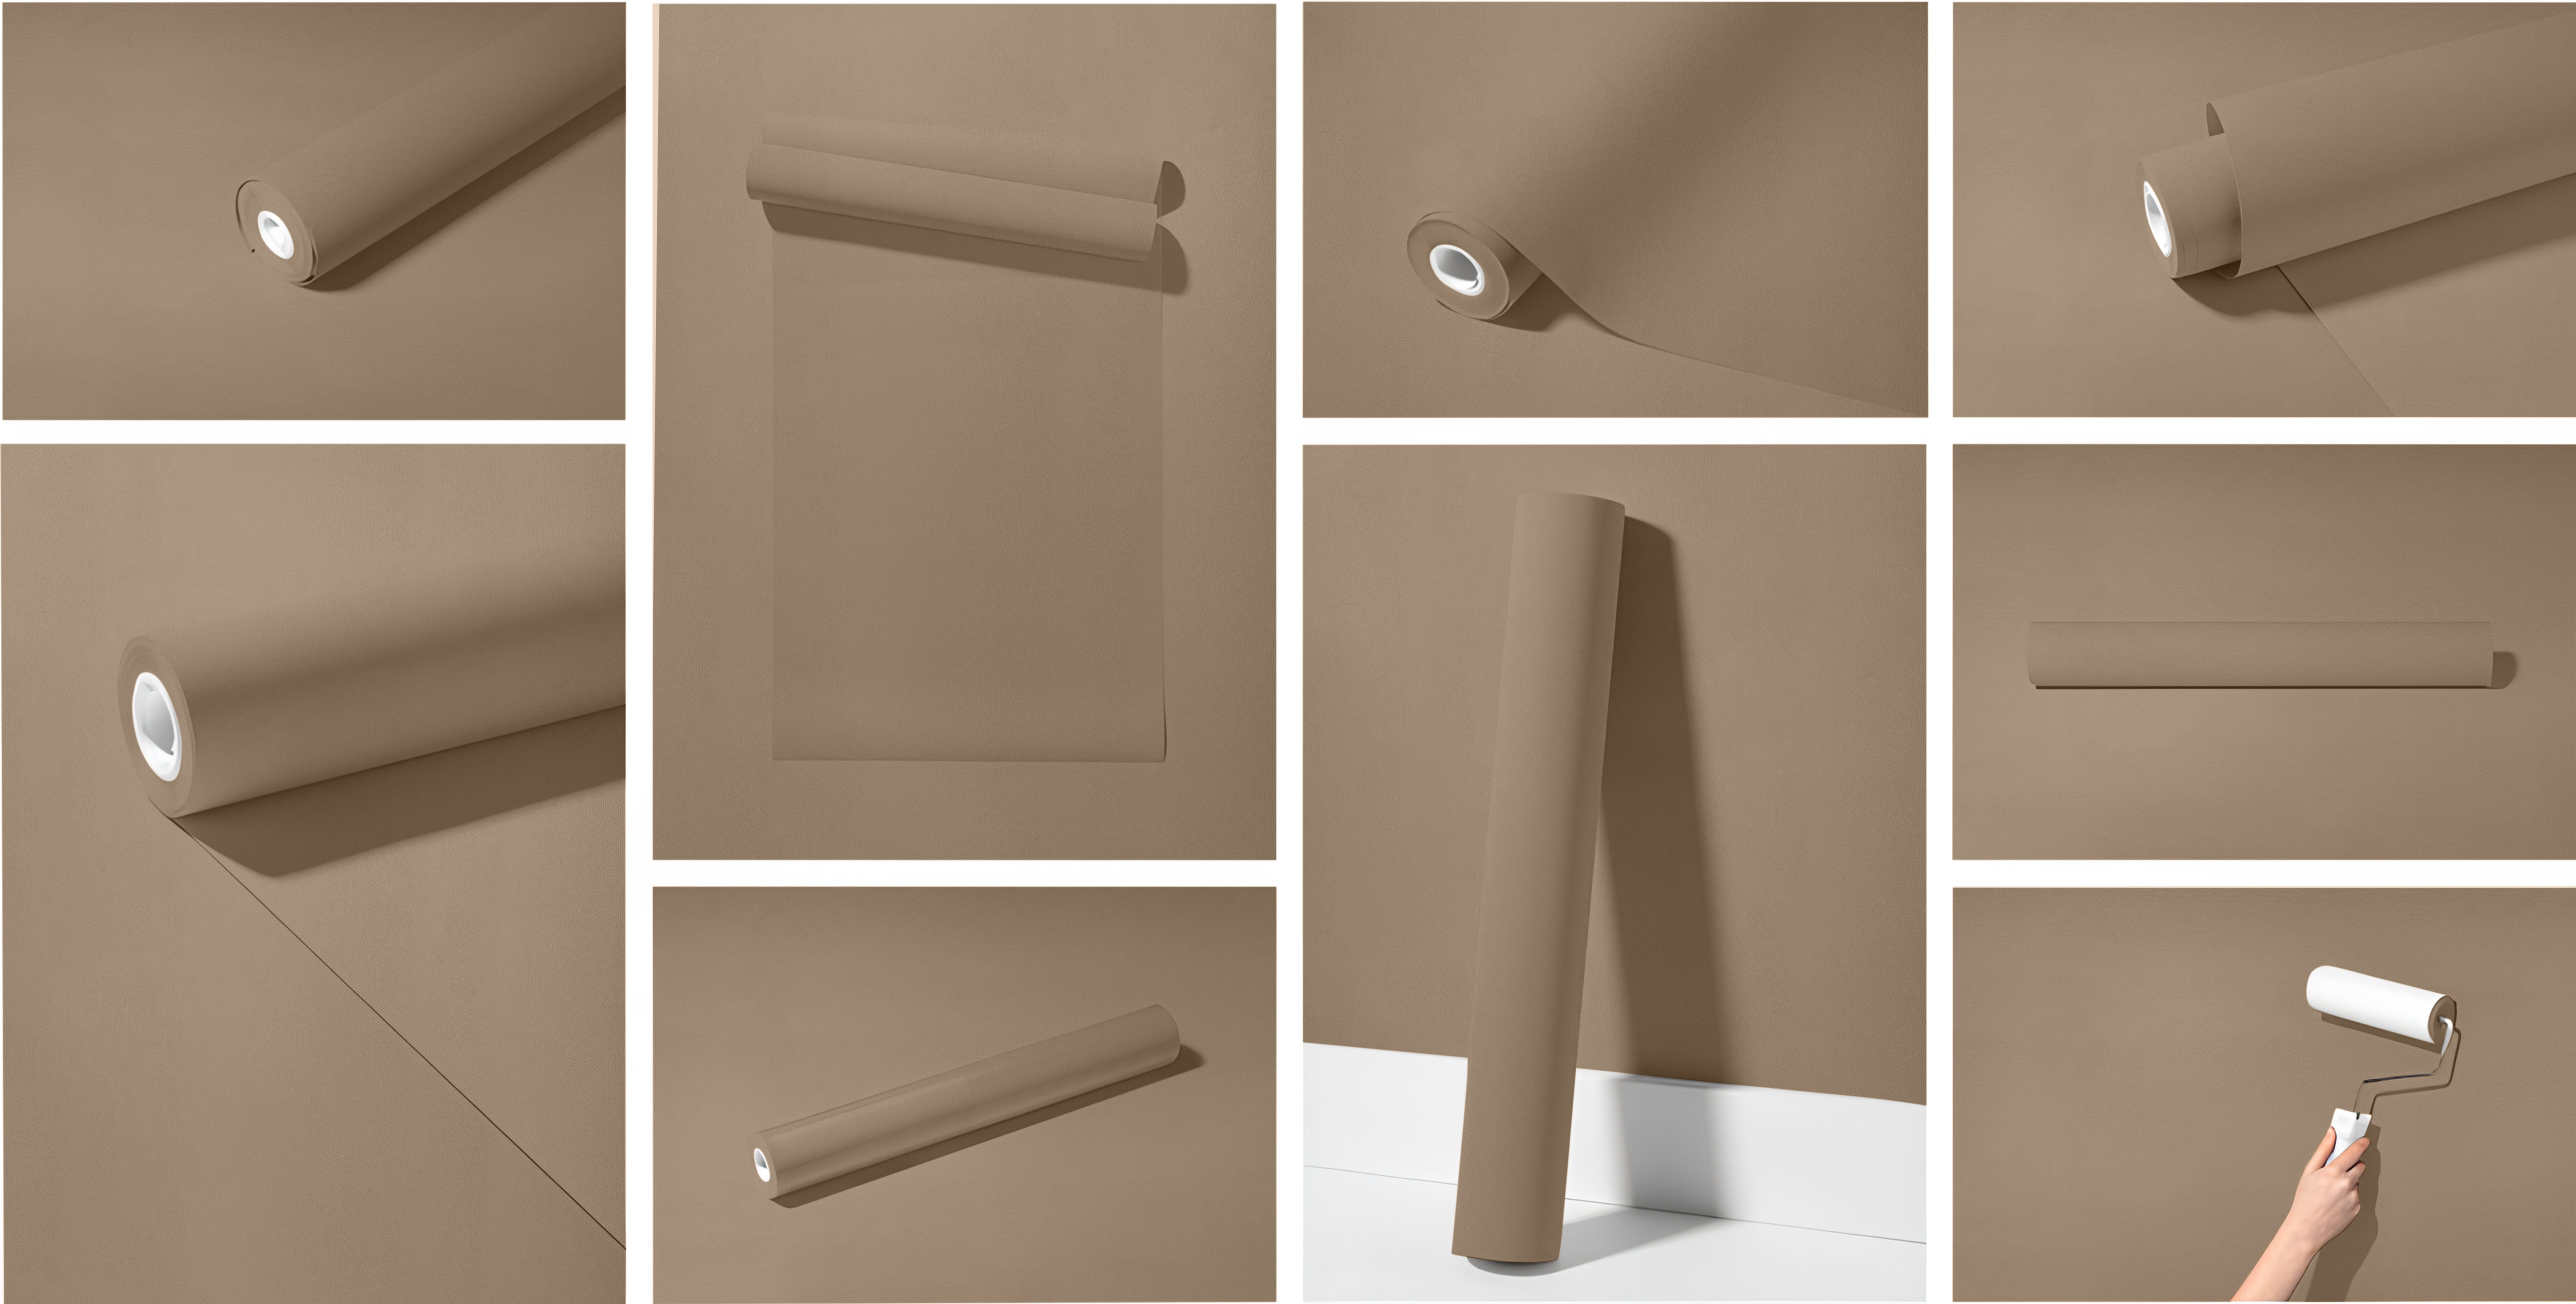 Peel & Stick Removable Re-usable Paint - Color RAL 1019 Grey Beige - offRAL™ - RALRAW LLC, USA